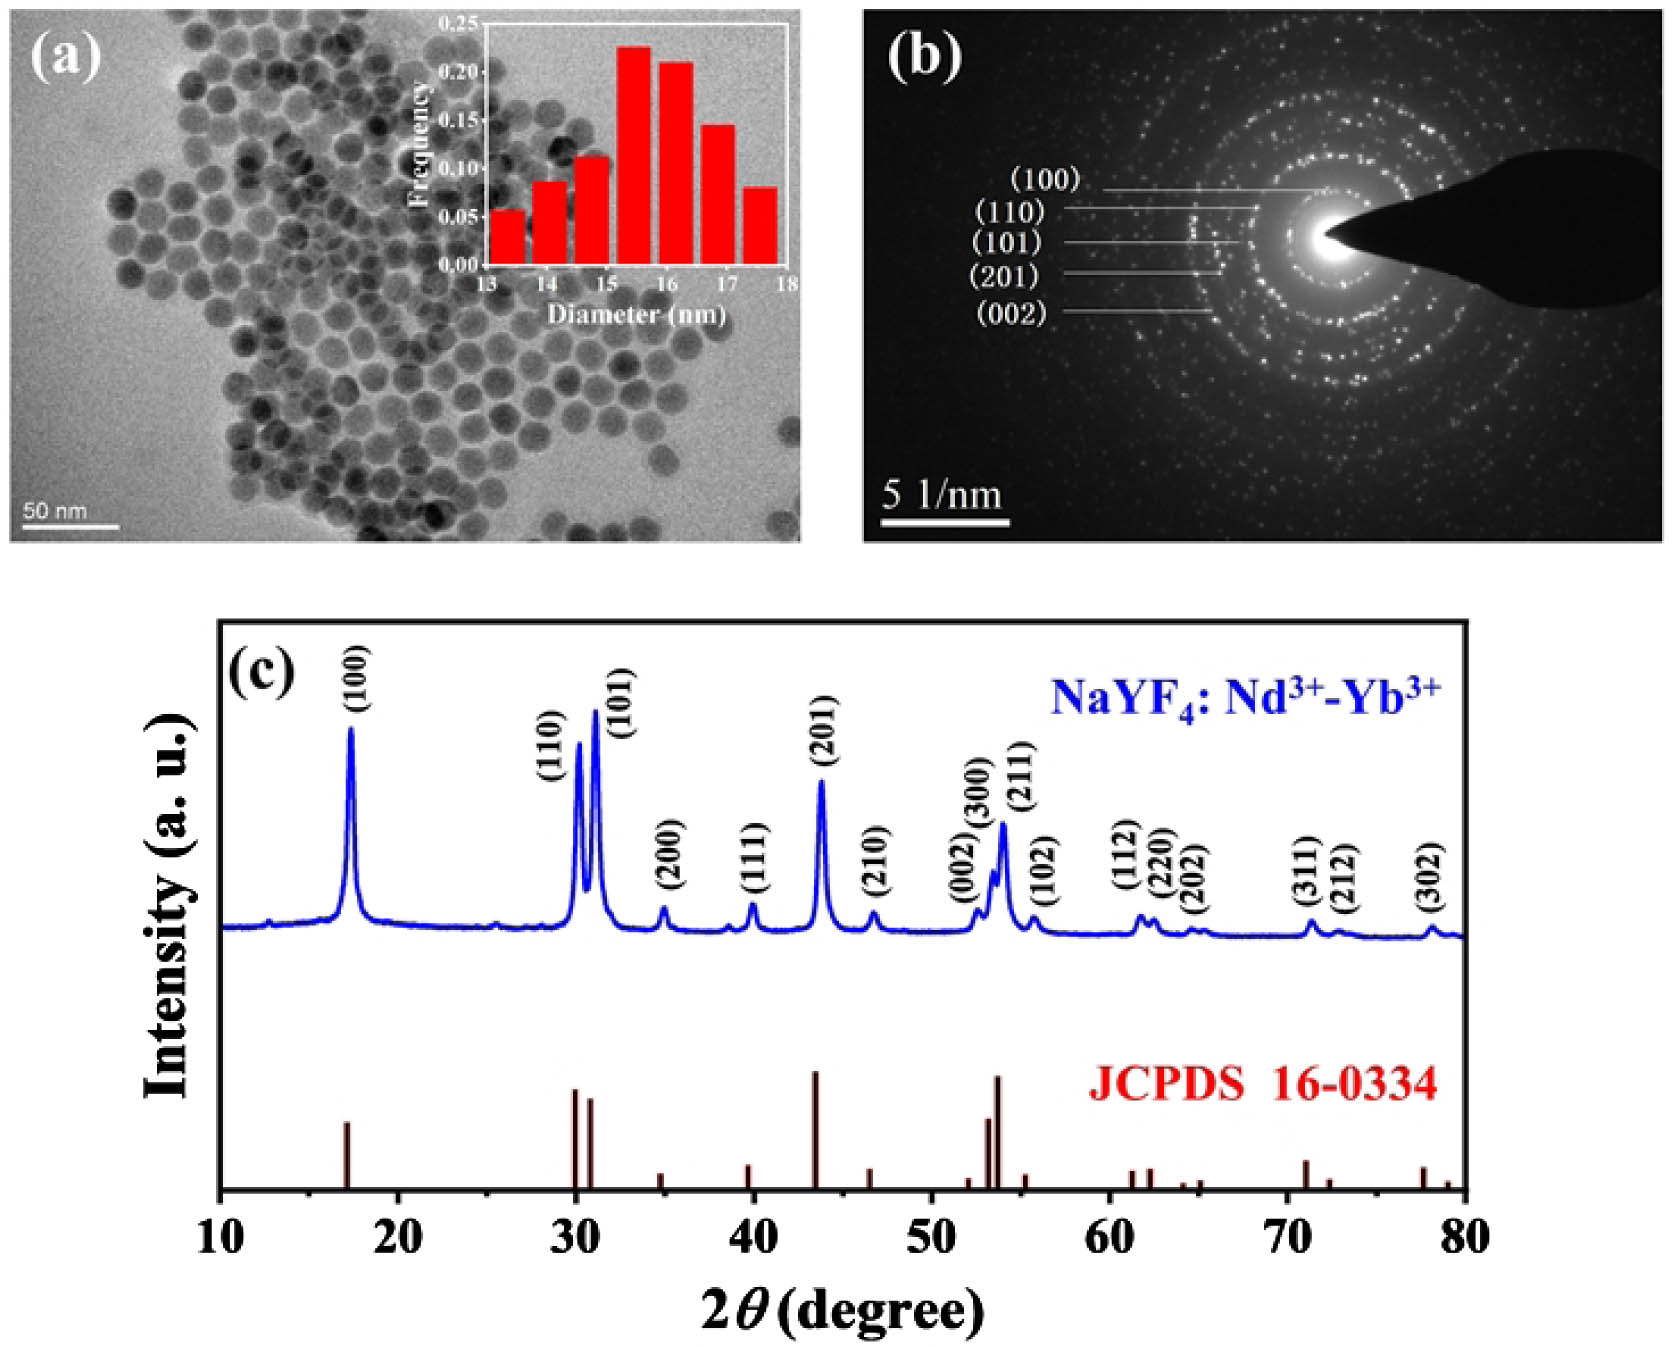 (a) TEM image of NaYF4:Nd3+−Yb3+ nanoparticles and the diameter distribution (insert), (b) selected-area electron diffraction pattern, and (c) XRD pattern for the sample.